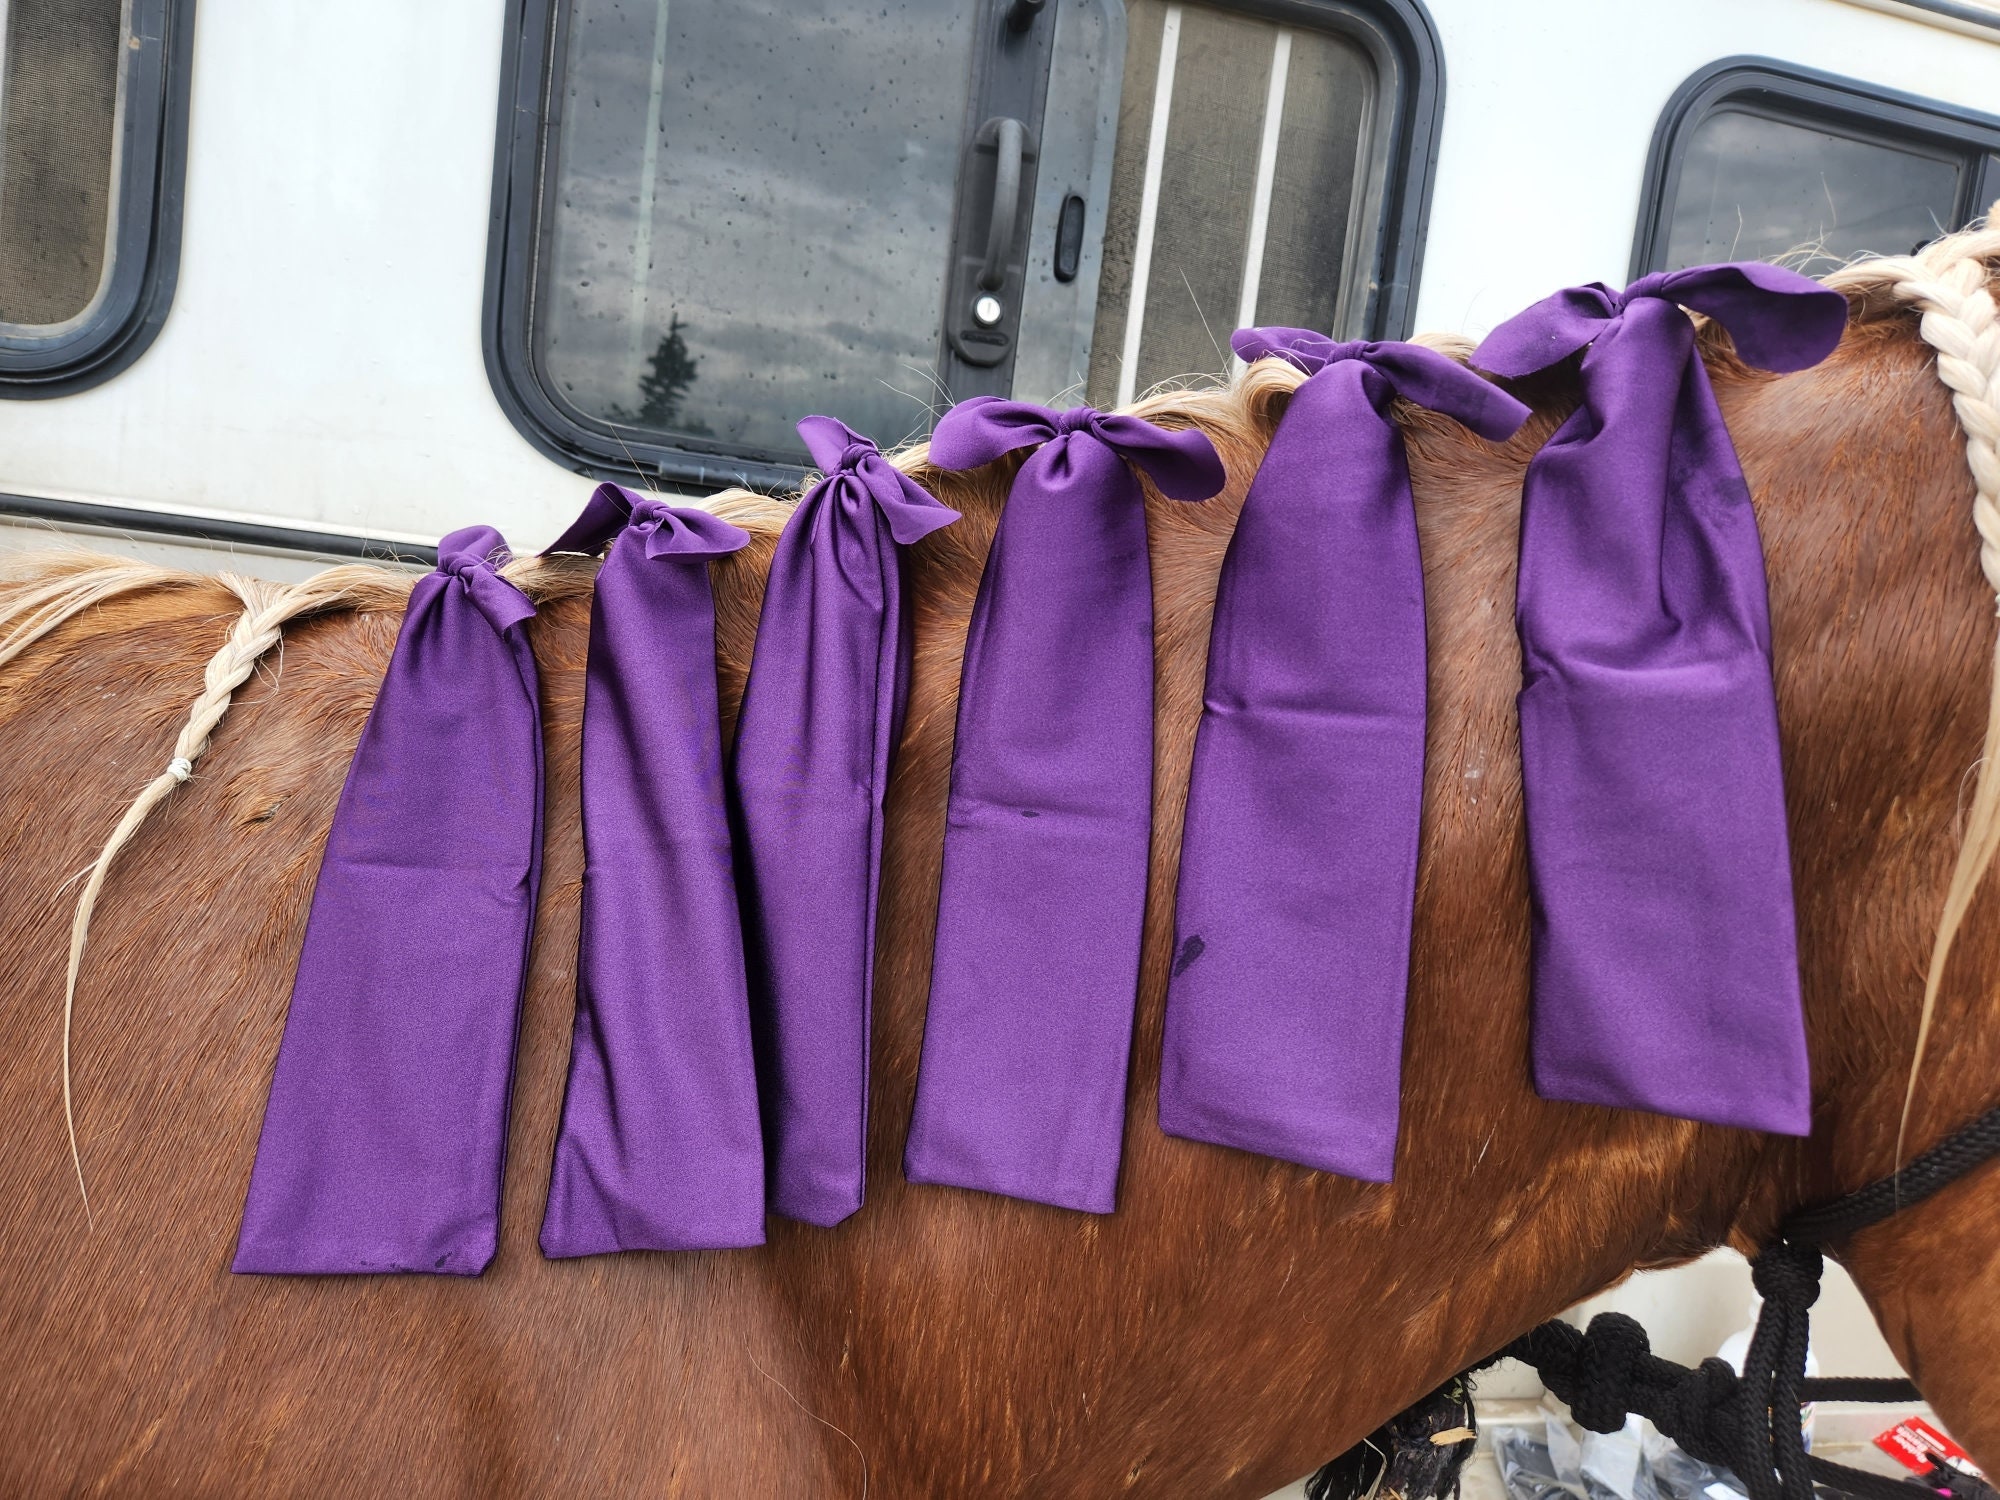  Tail bag for Horses, Tail Bag, Horse tail bag, Mini Tail bag,  Mane Tail Bag Laura Hall P&Design Tail bag (Mane) (Horse) (Oversize Tail Bag)  (Pony Tail Bag) : Handmade Products